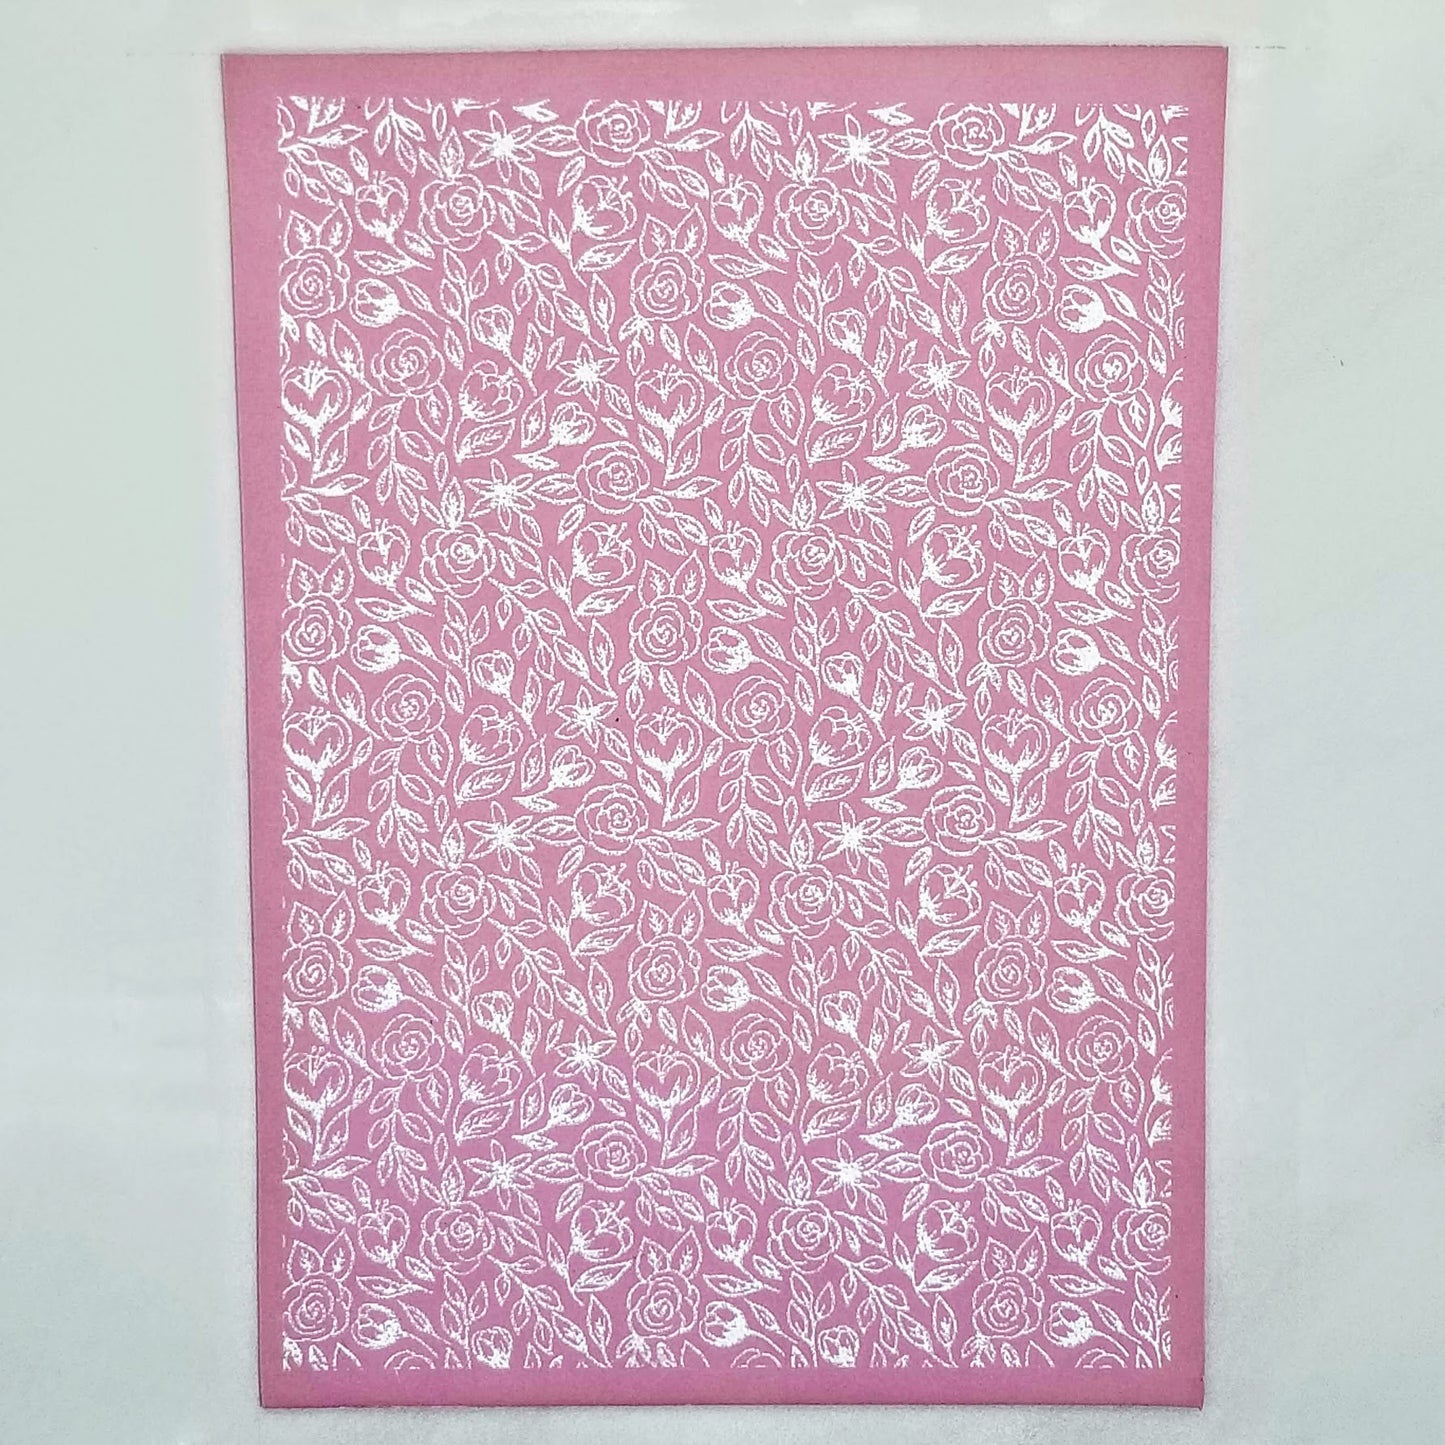 Romantic roses flower floral botanical sample silk screen stencil painting on polymer clay slab